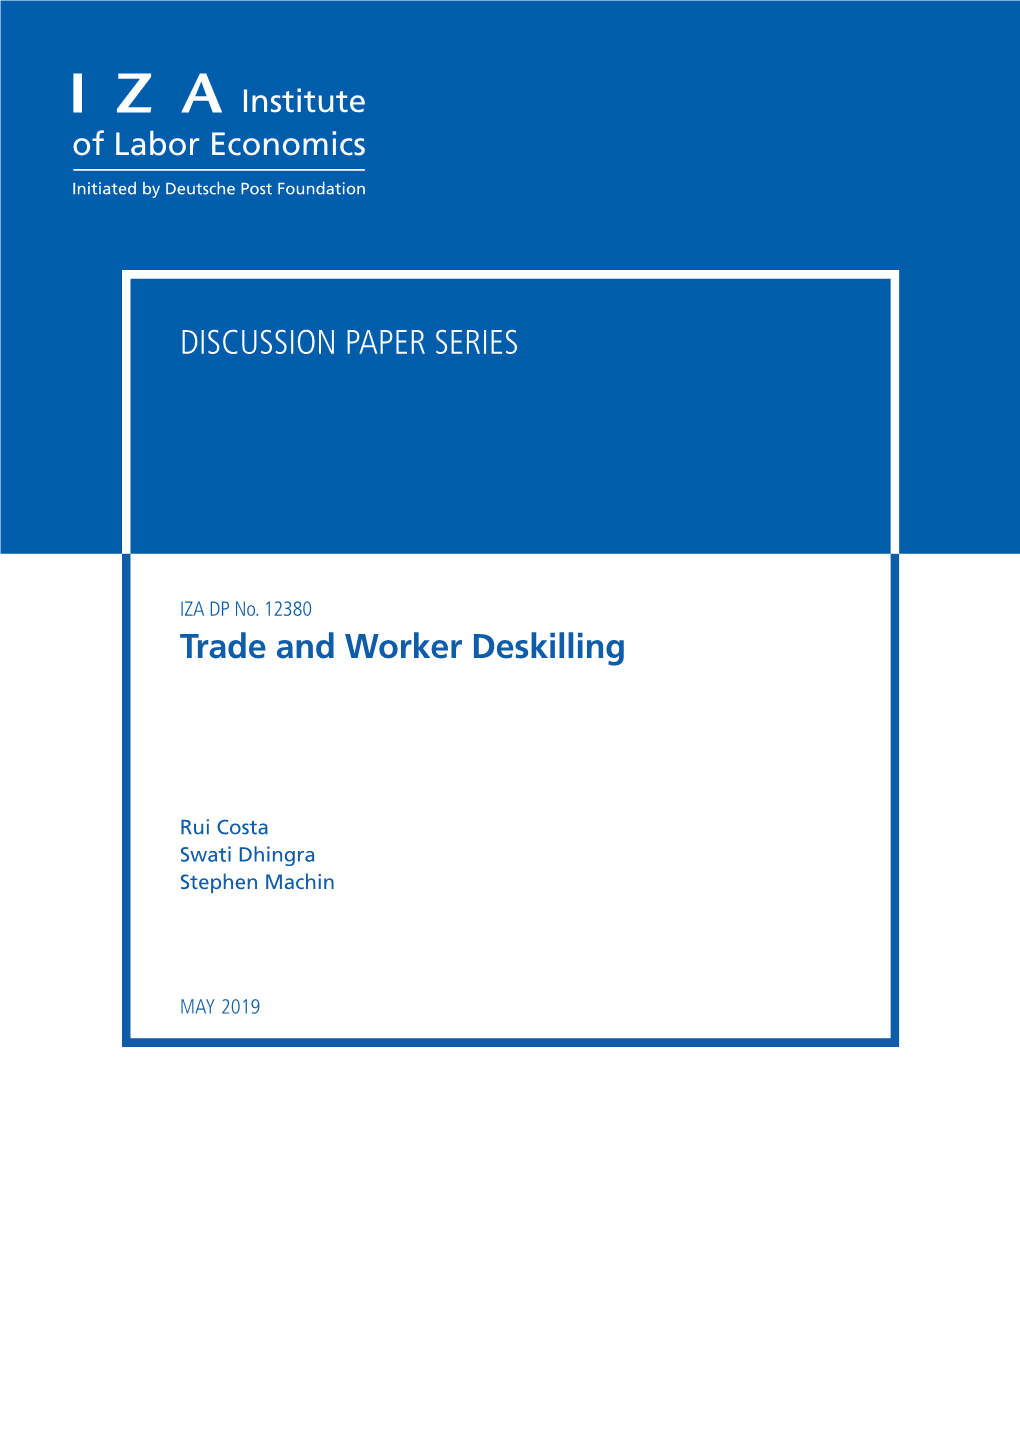 Trade and Worker Deskilling